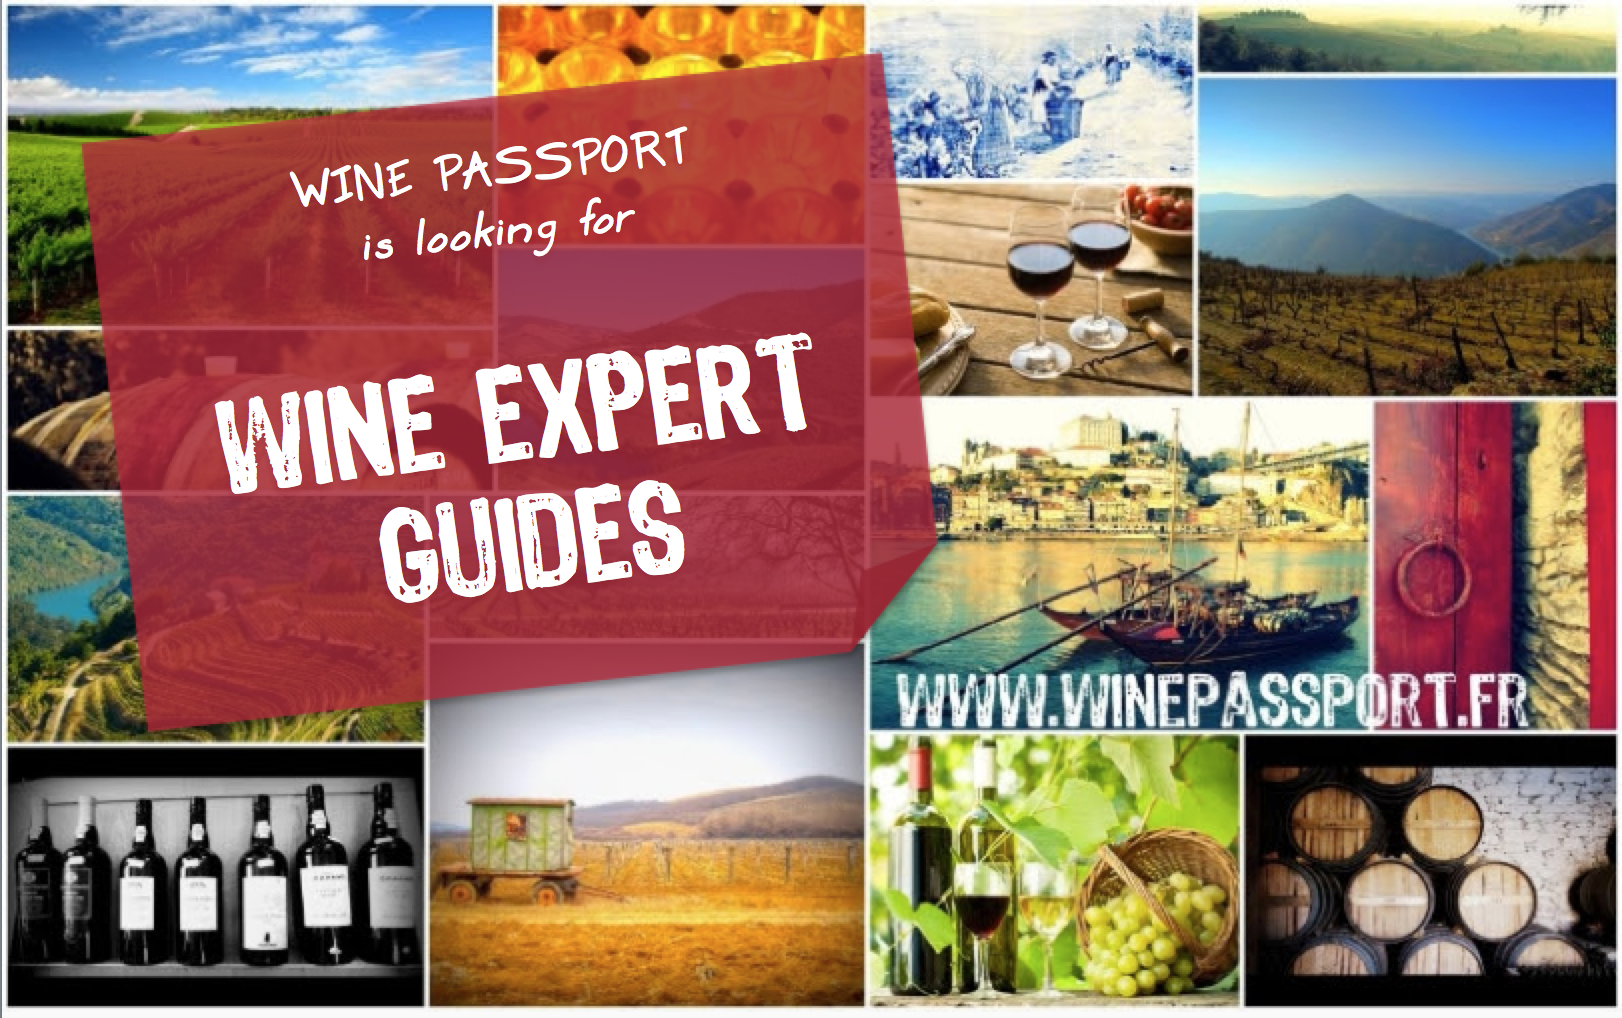 Wine Passport is looking for WINE EXPERT GUIDES !